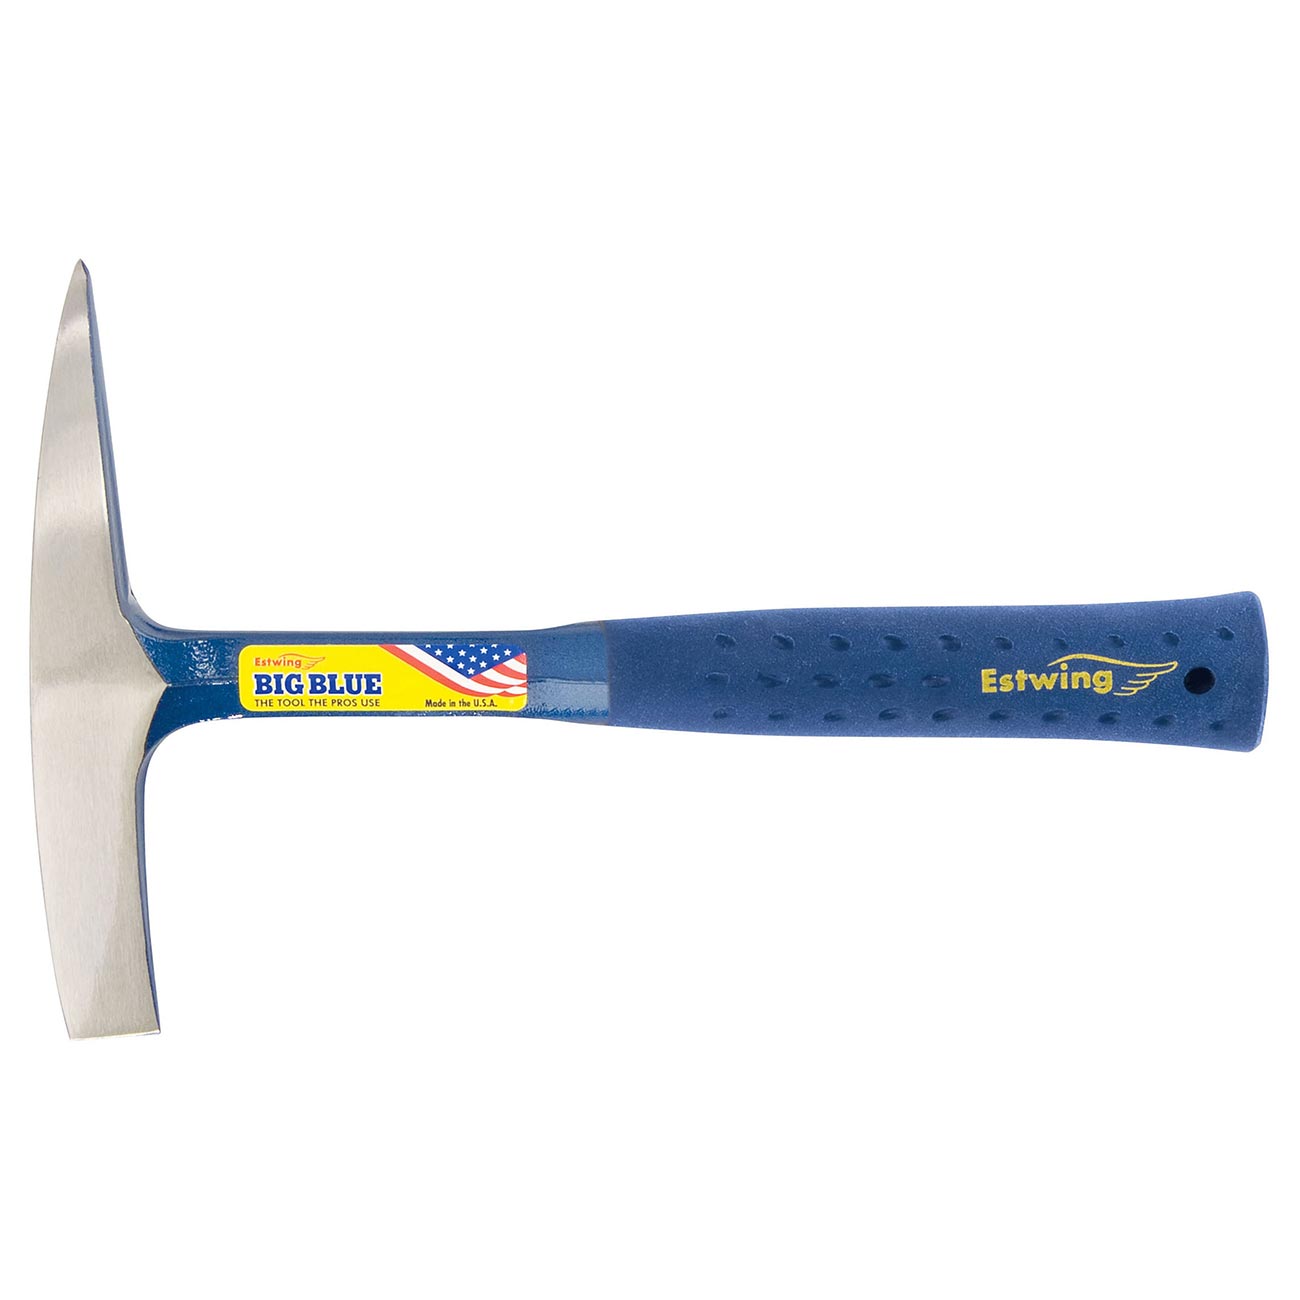 Estwing 14 oz. Smooth Face Welding Chipping Hammer - Blue Shock Reduction Grip